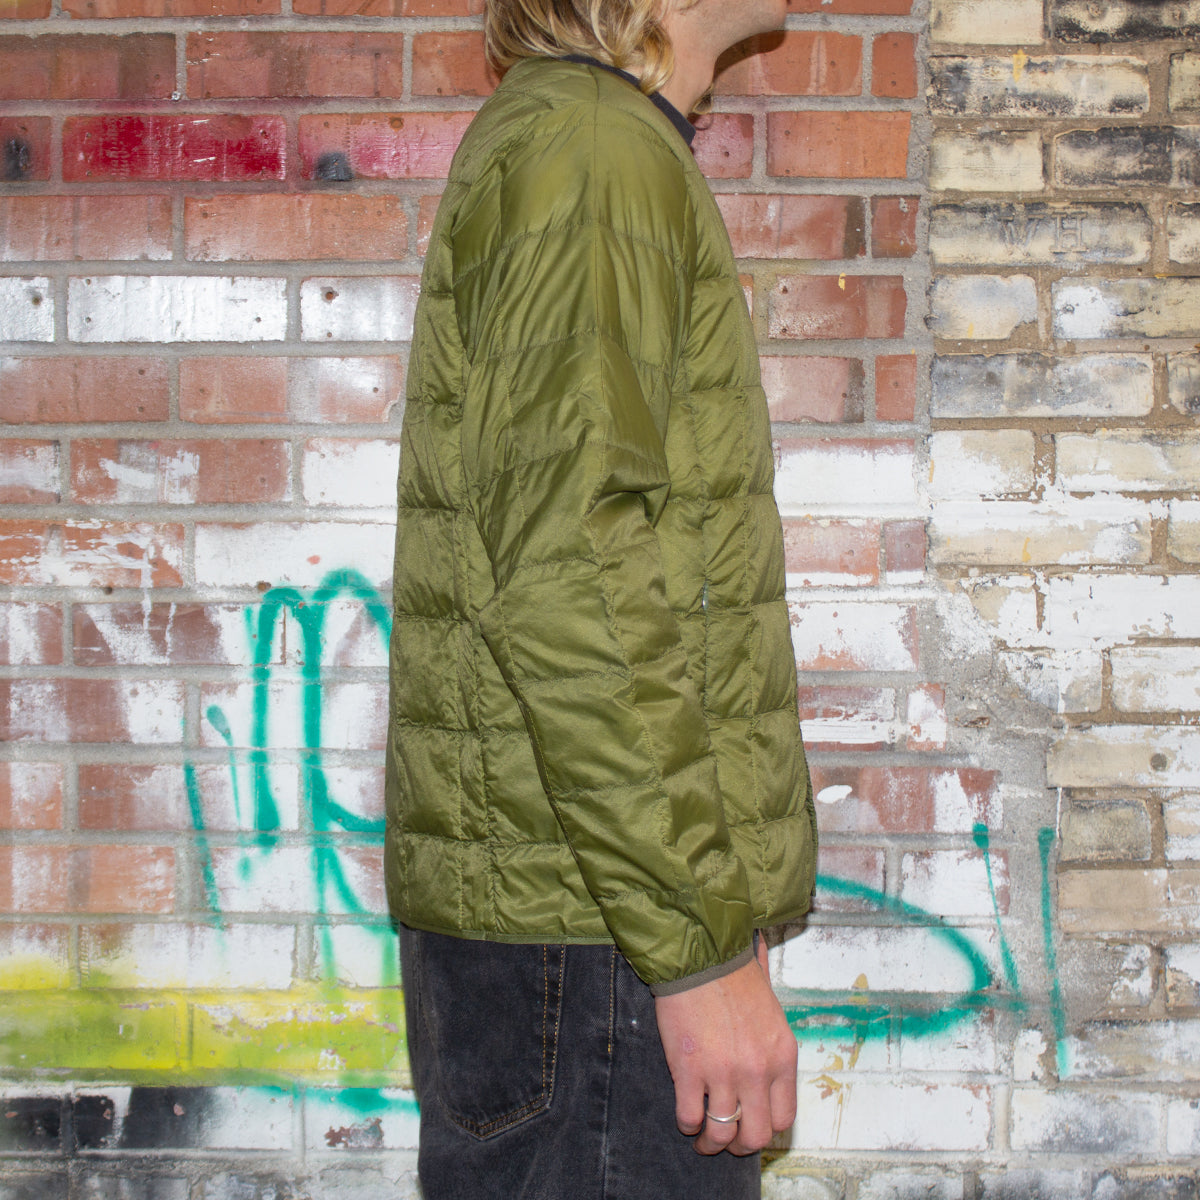 Taion x Gramicci Inner Down Jacket Olive